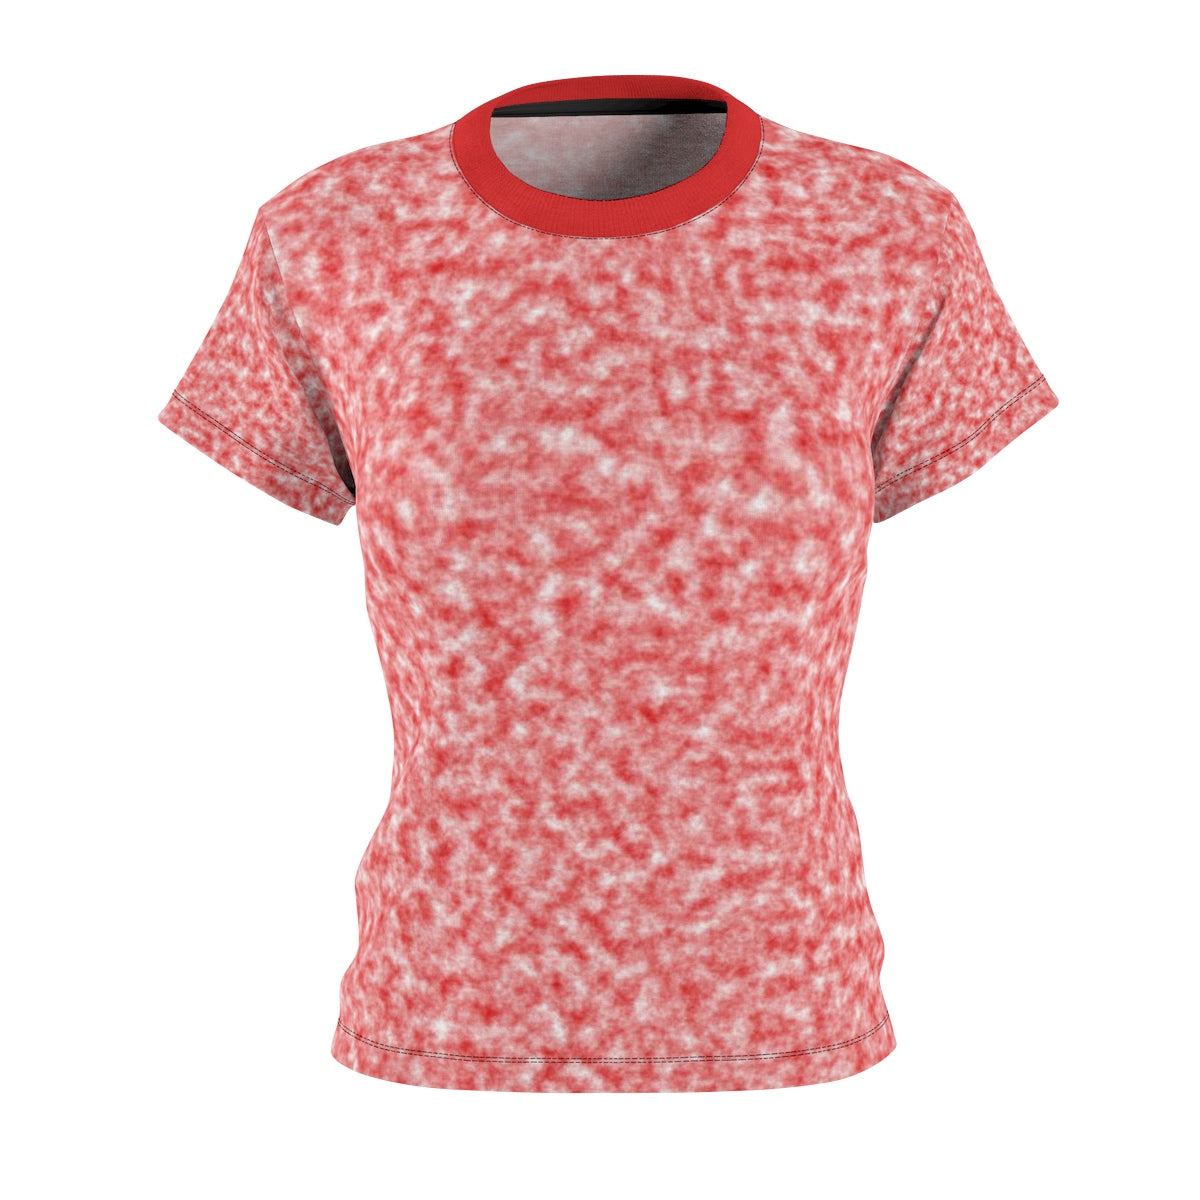 Awesome and White Clouds Women's Tee